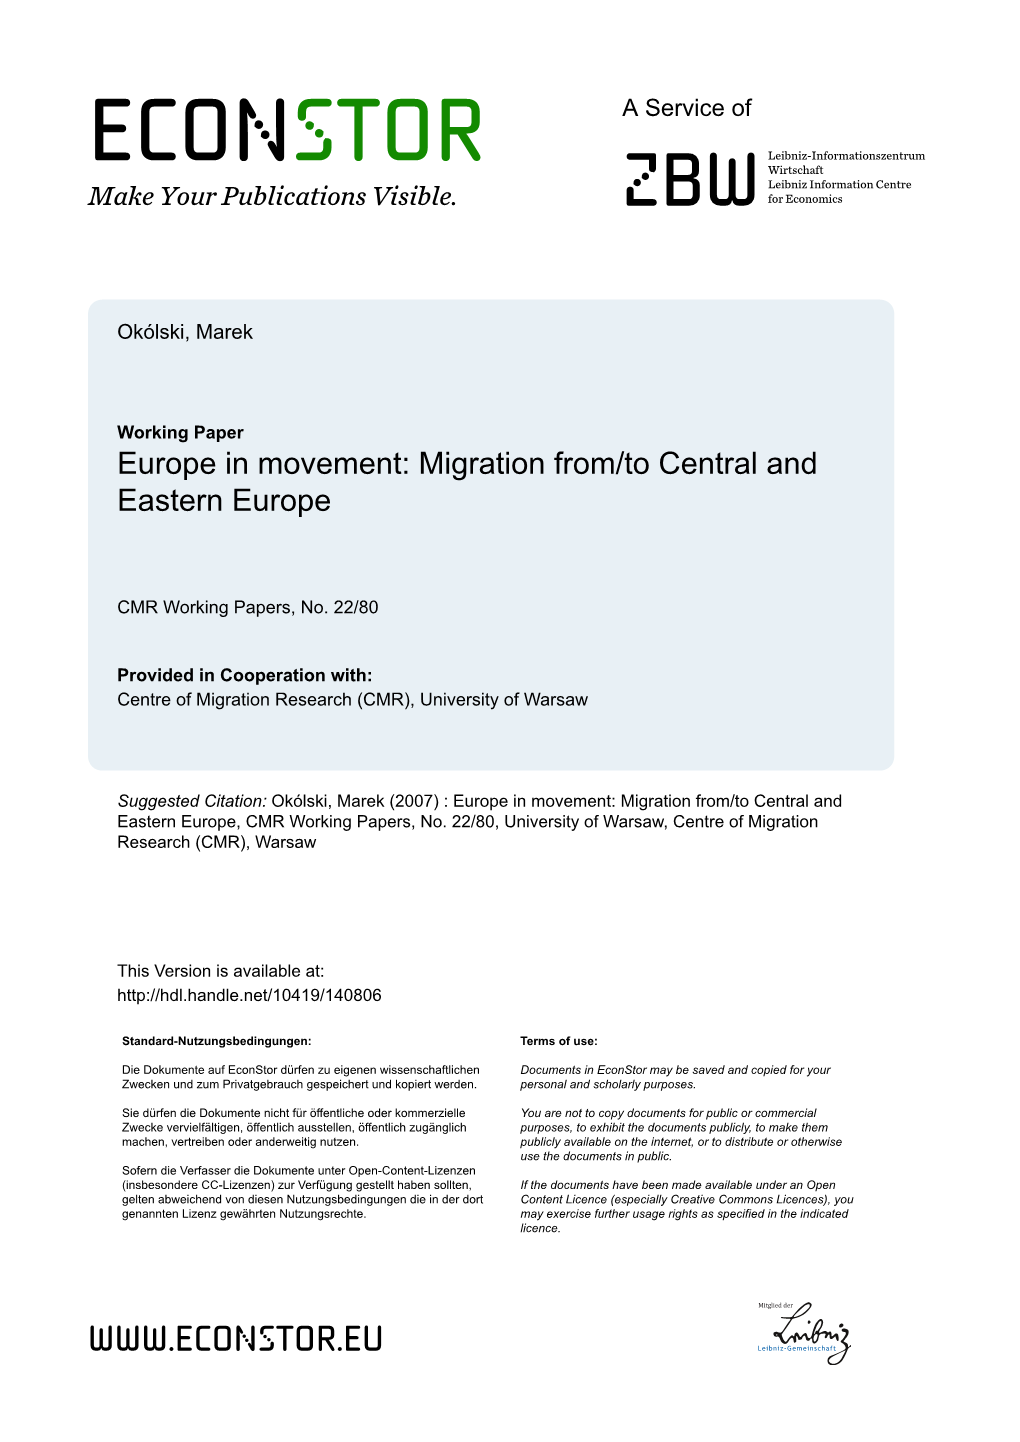 Europe in Movement: Migration From/To Central and Eastern Europe